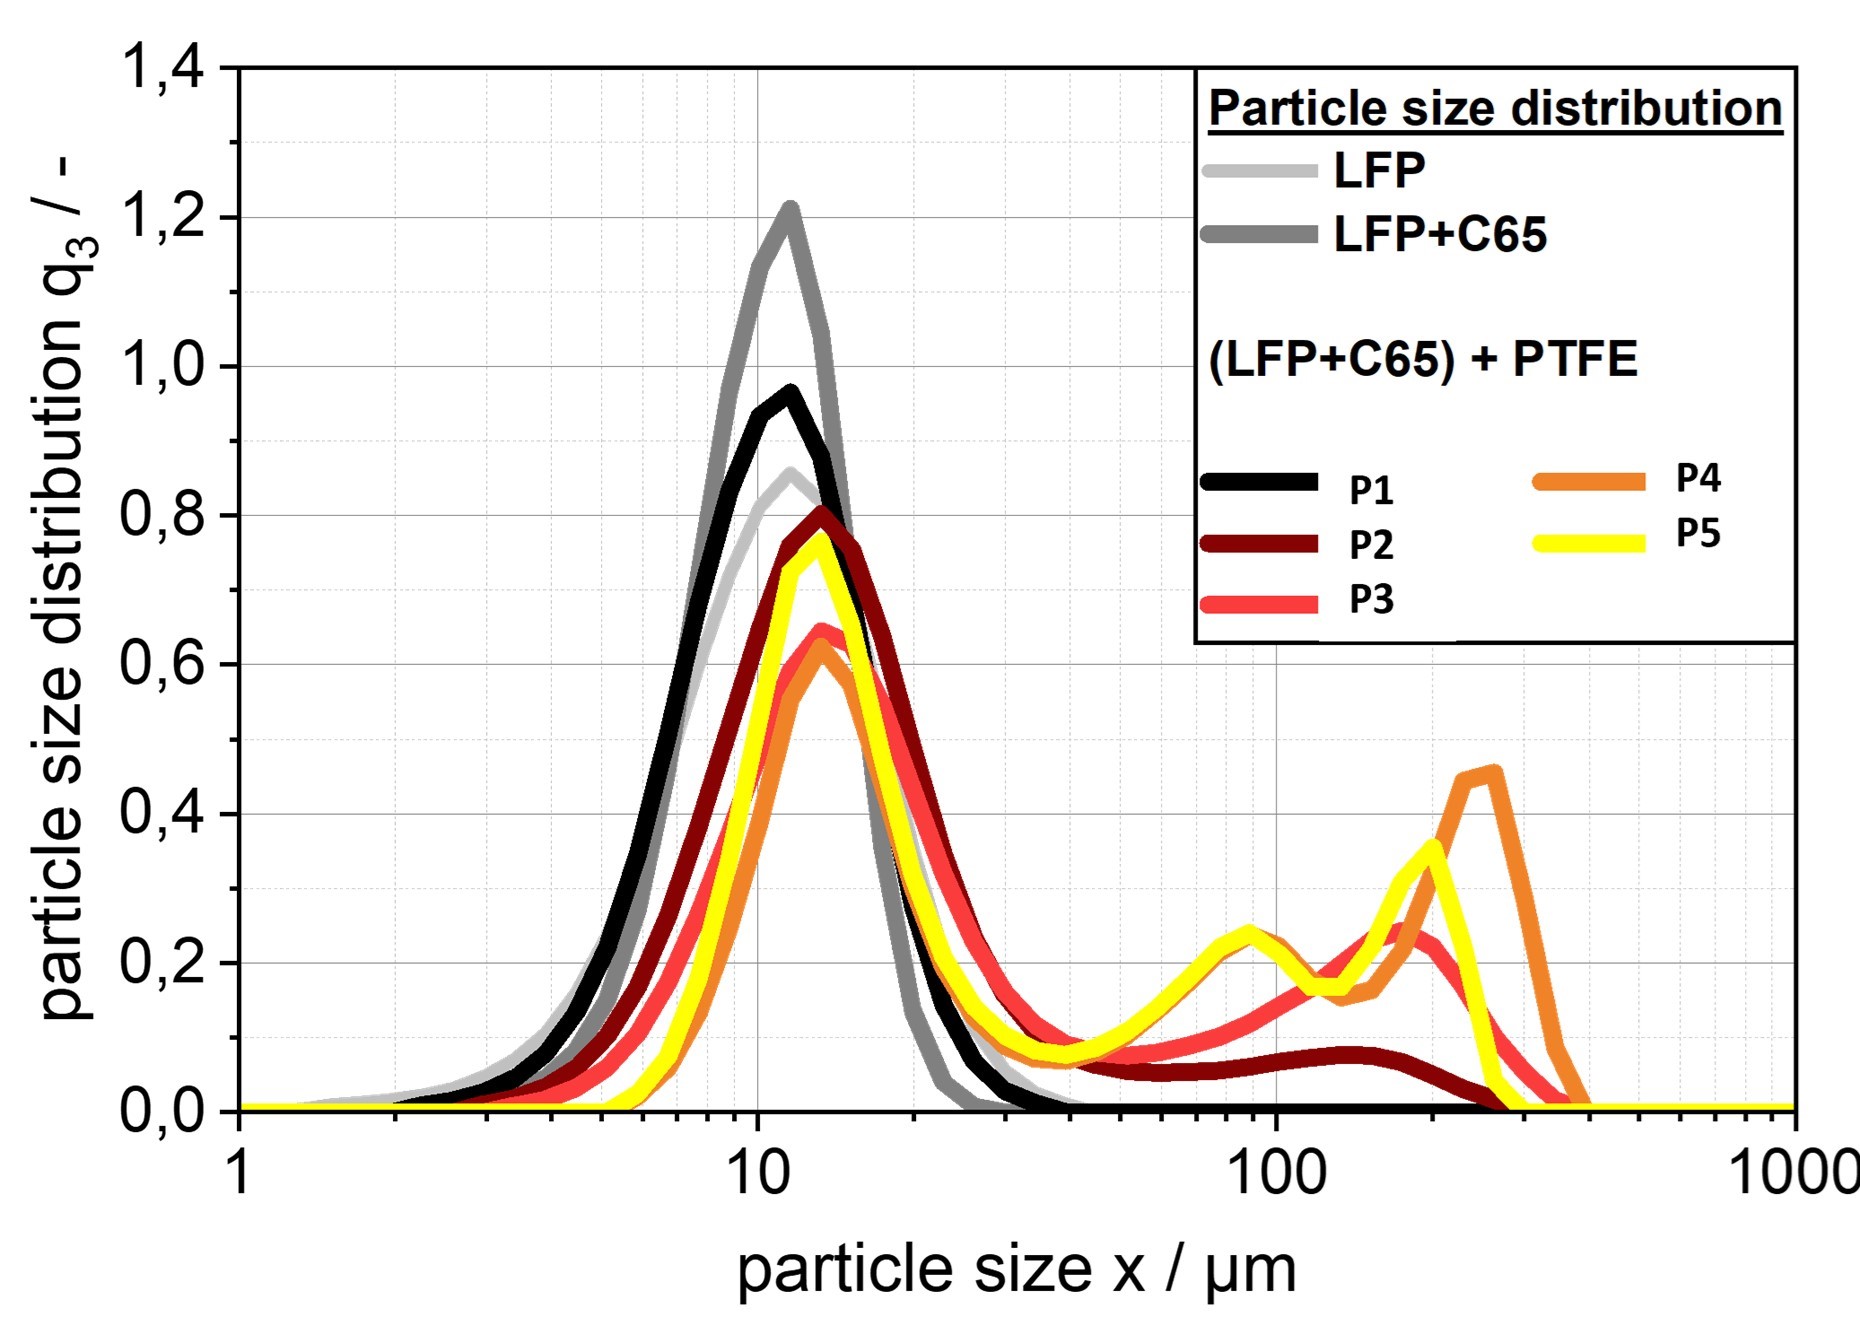 figure showing the particle size distributions by number